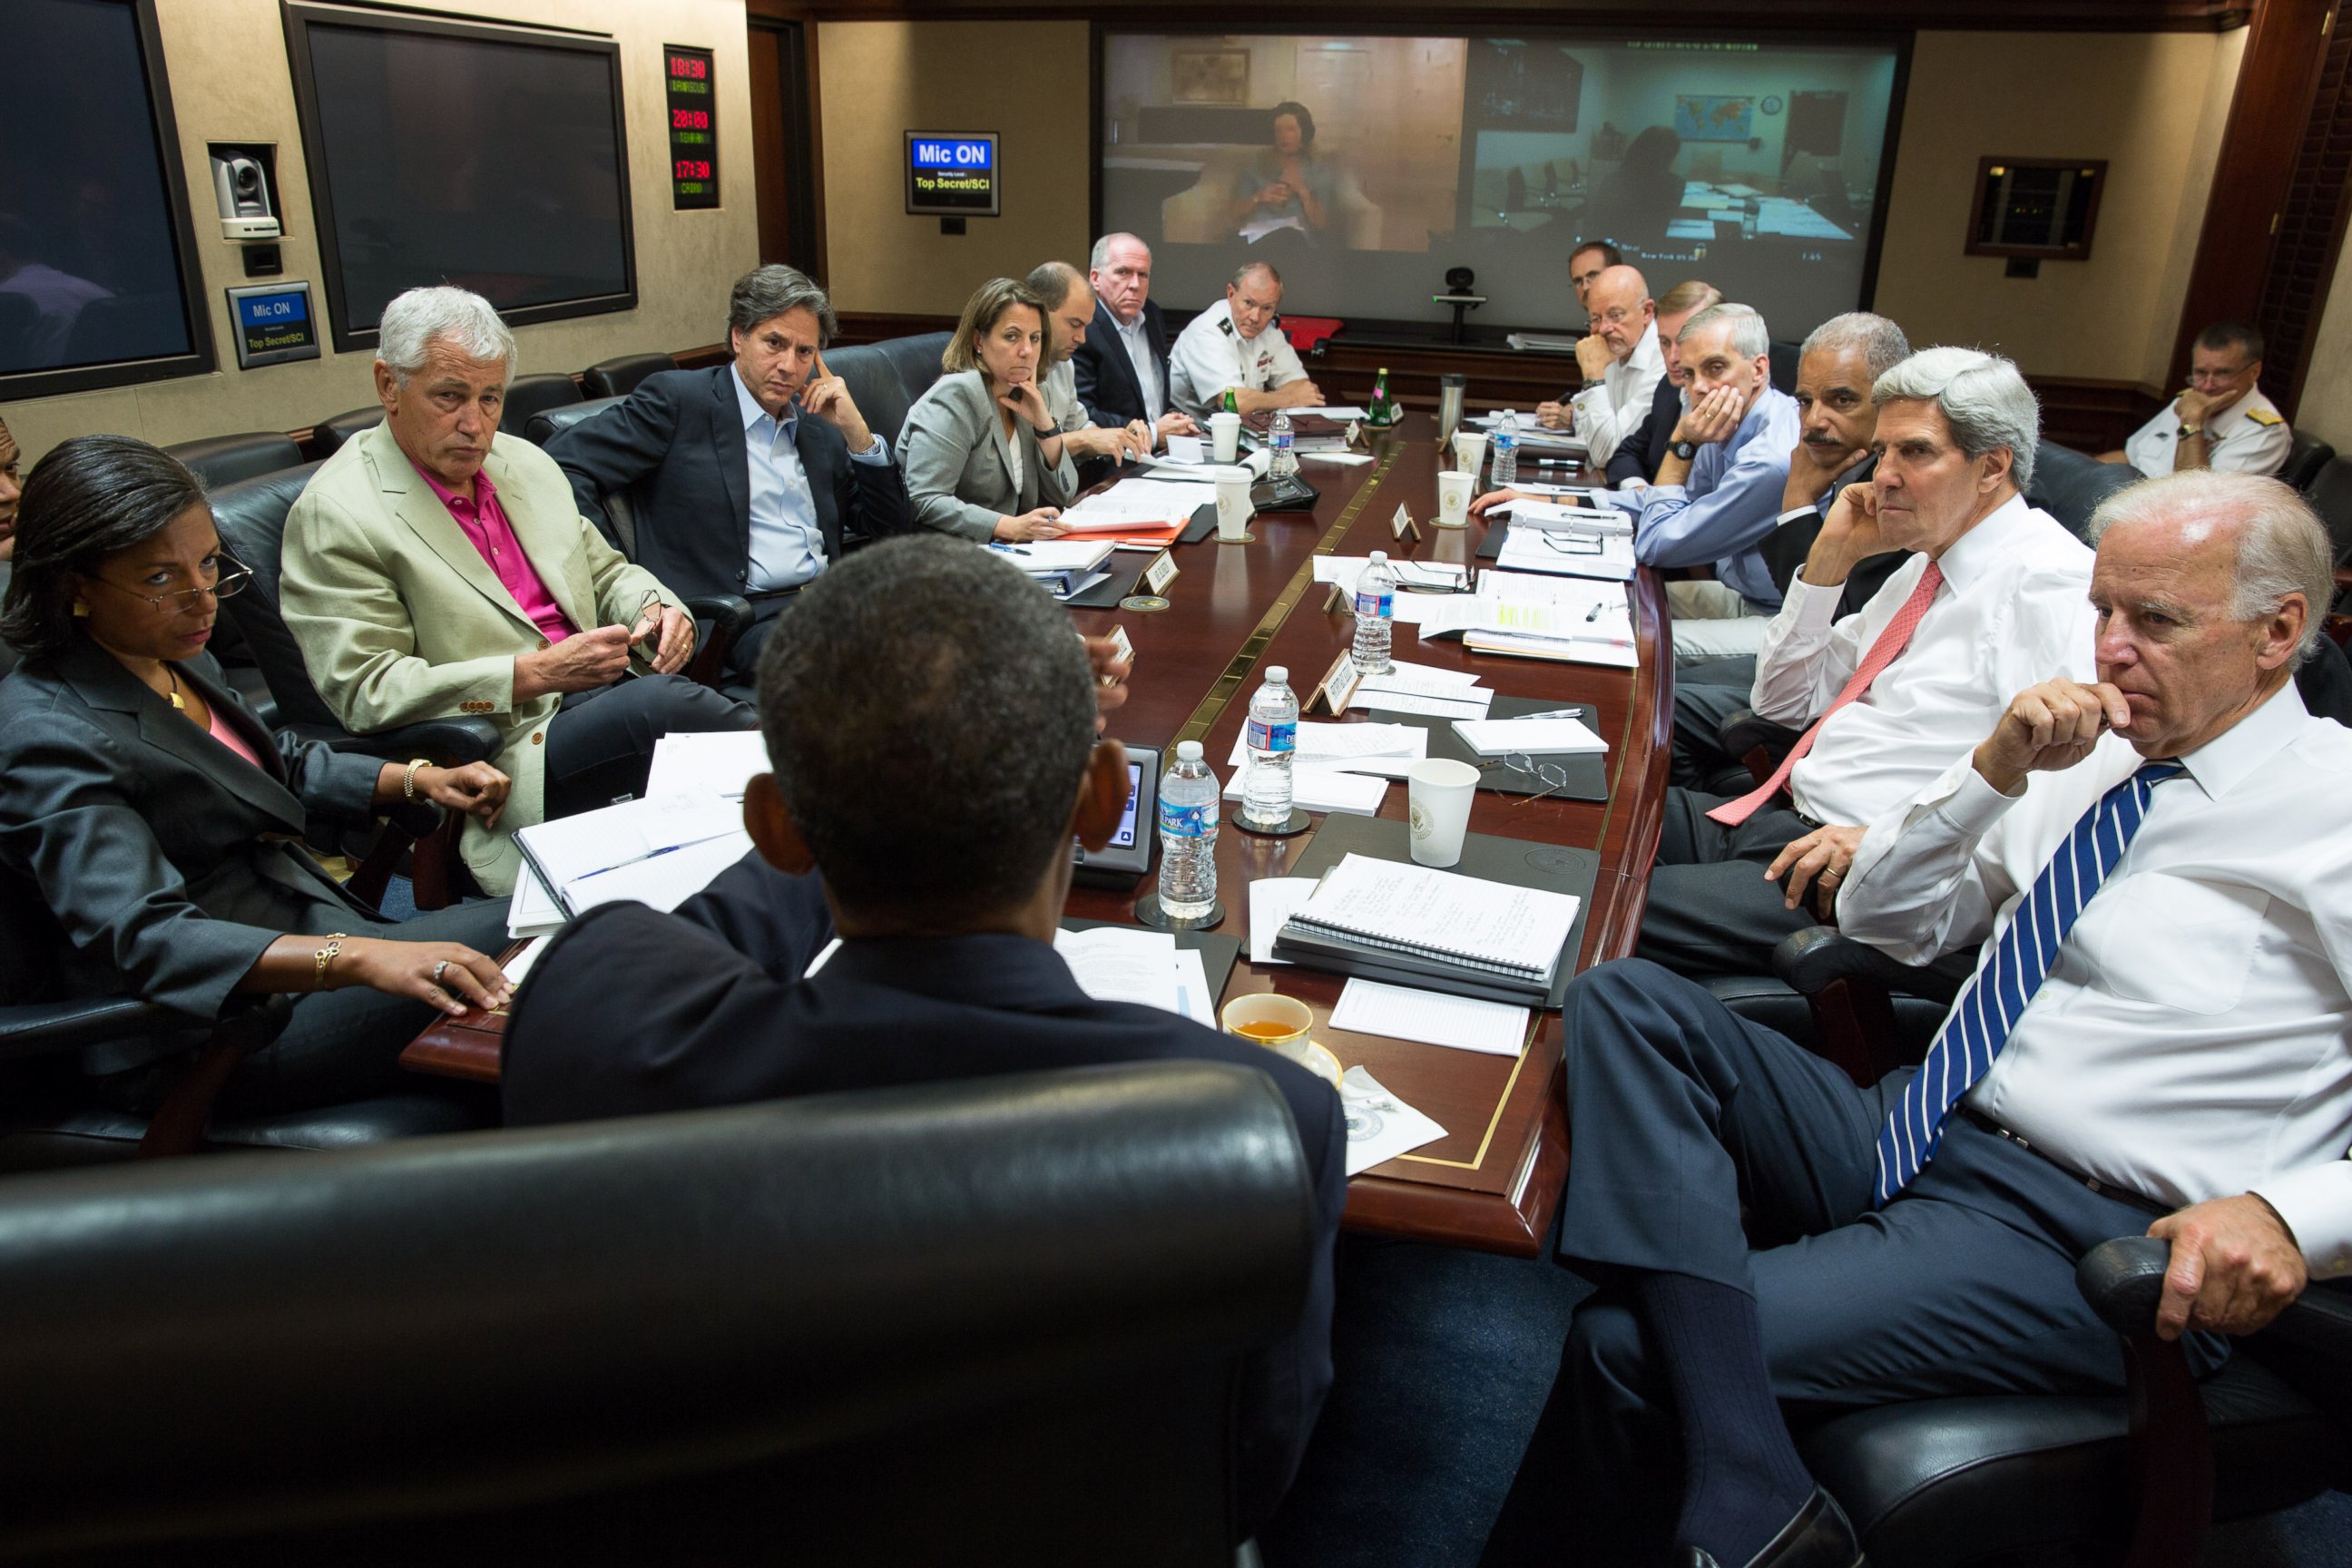 PHOTO: President Barack Obama meets in the Situation Room with his national security advisers to discuss strategy in Syria on August 31, 2013.